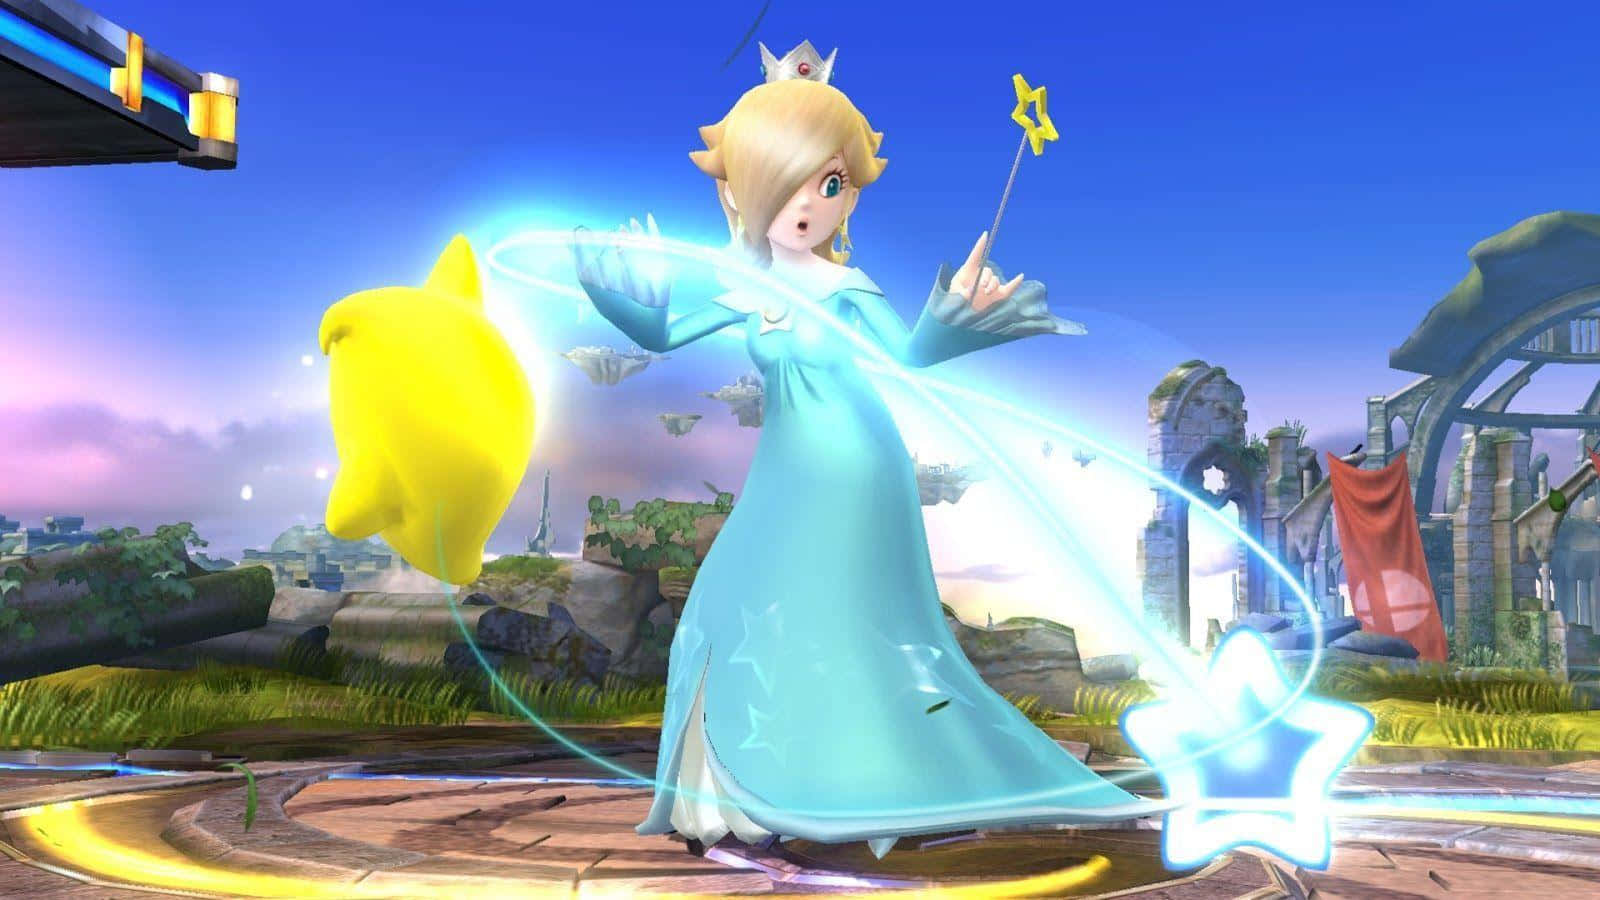 Princess Rosalina striking a pose in her ethereal cosmic essence. Wallpaper